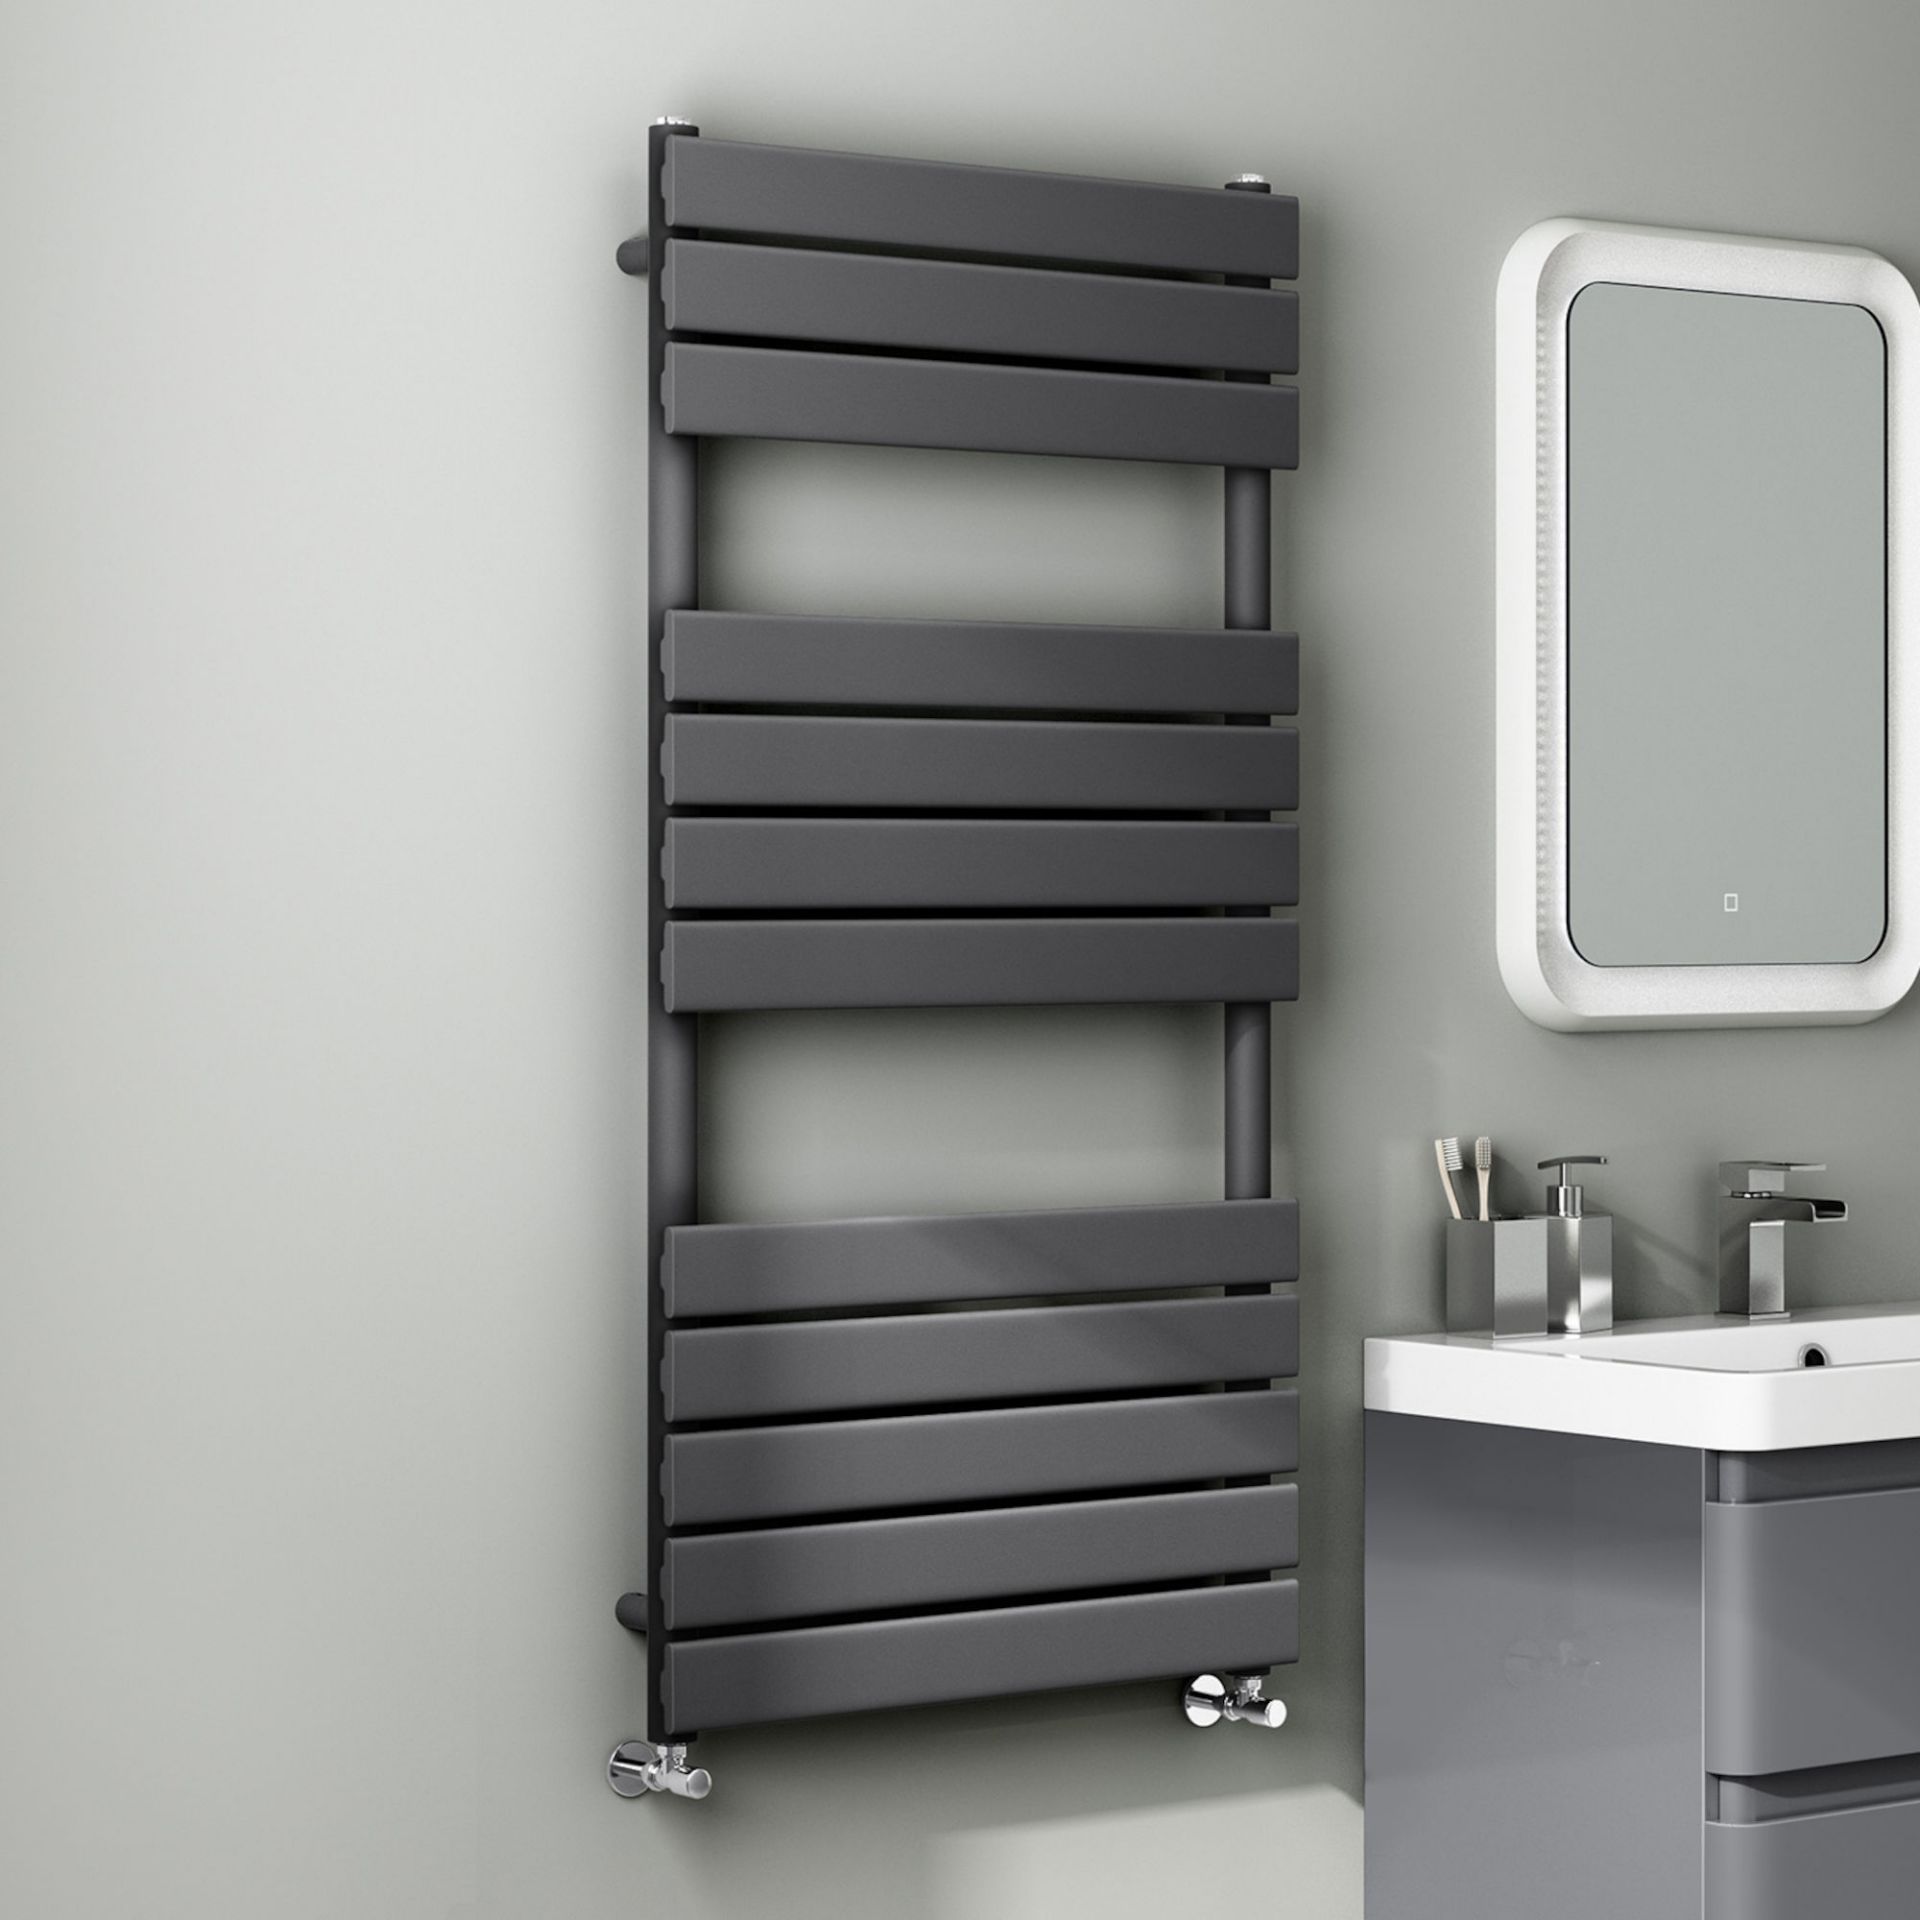 (EY15) 1200x600mm Anthracite Flat Panel Ladder Towel Radiator. . Made with low carbon steel,